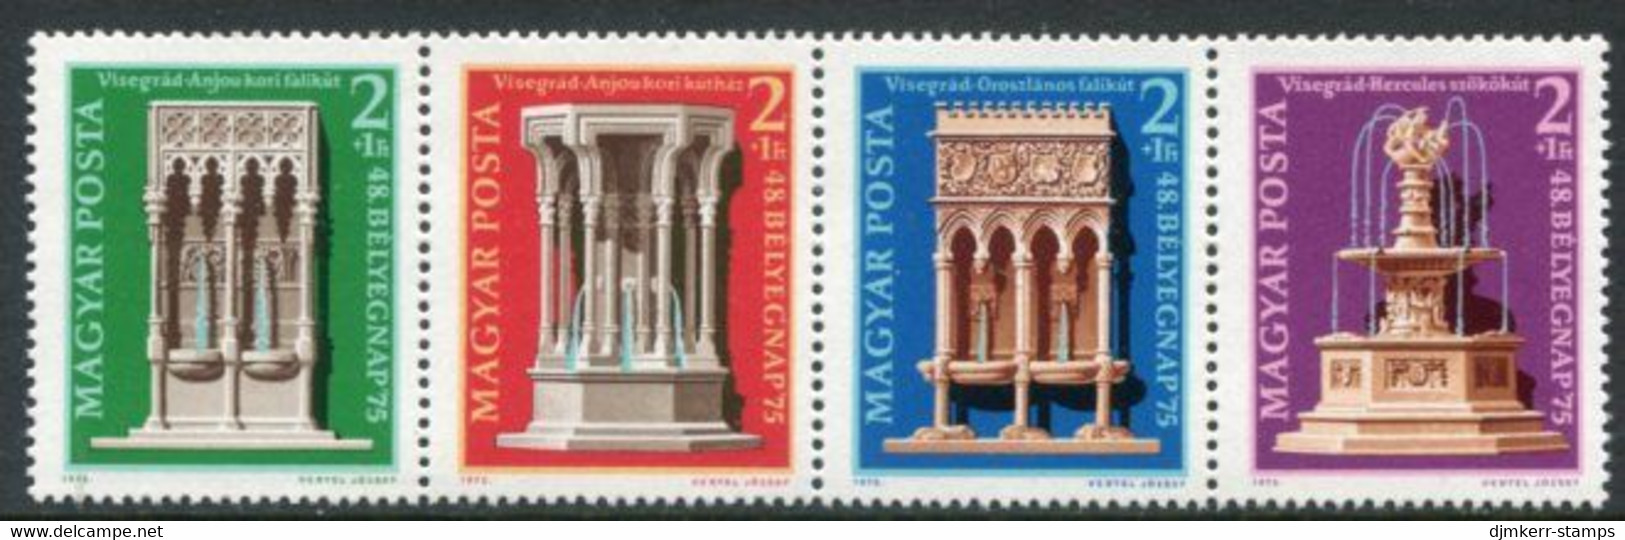 HUNGARY 1975 Stamp Day: Protection Of Monuments  MNH / **...  Michel 3060-63 - Ungebraucht